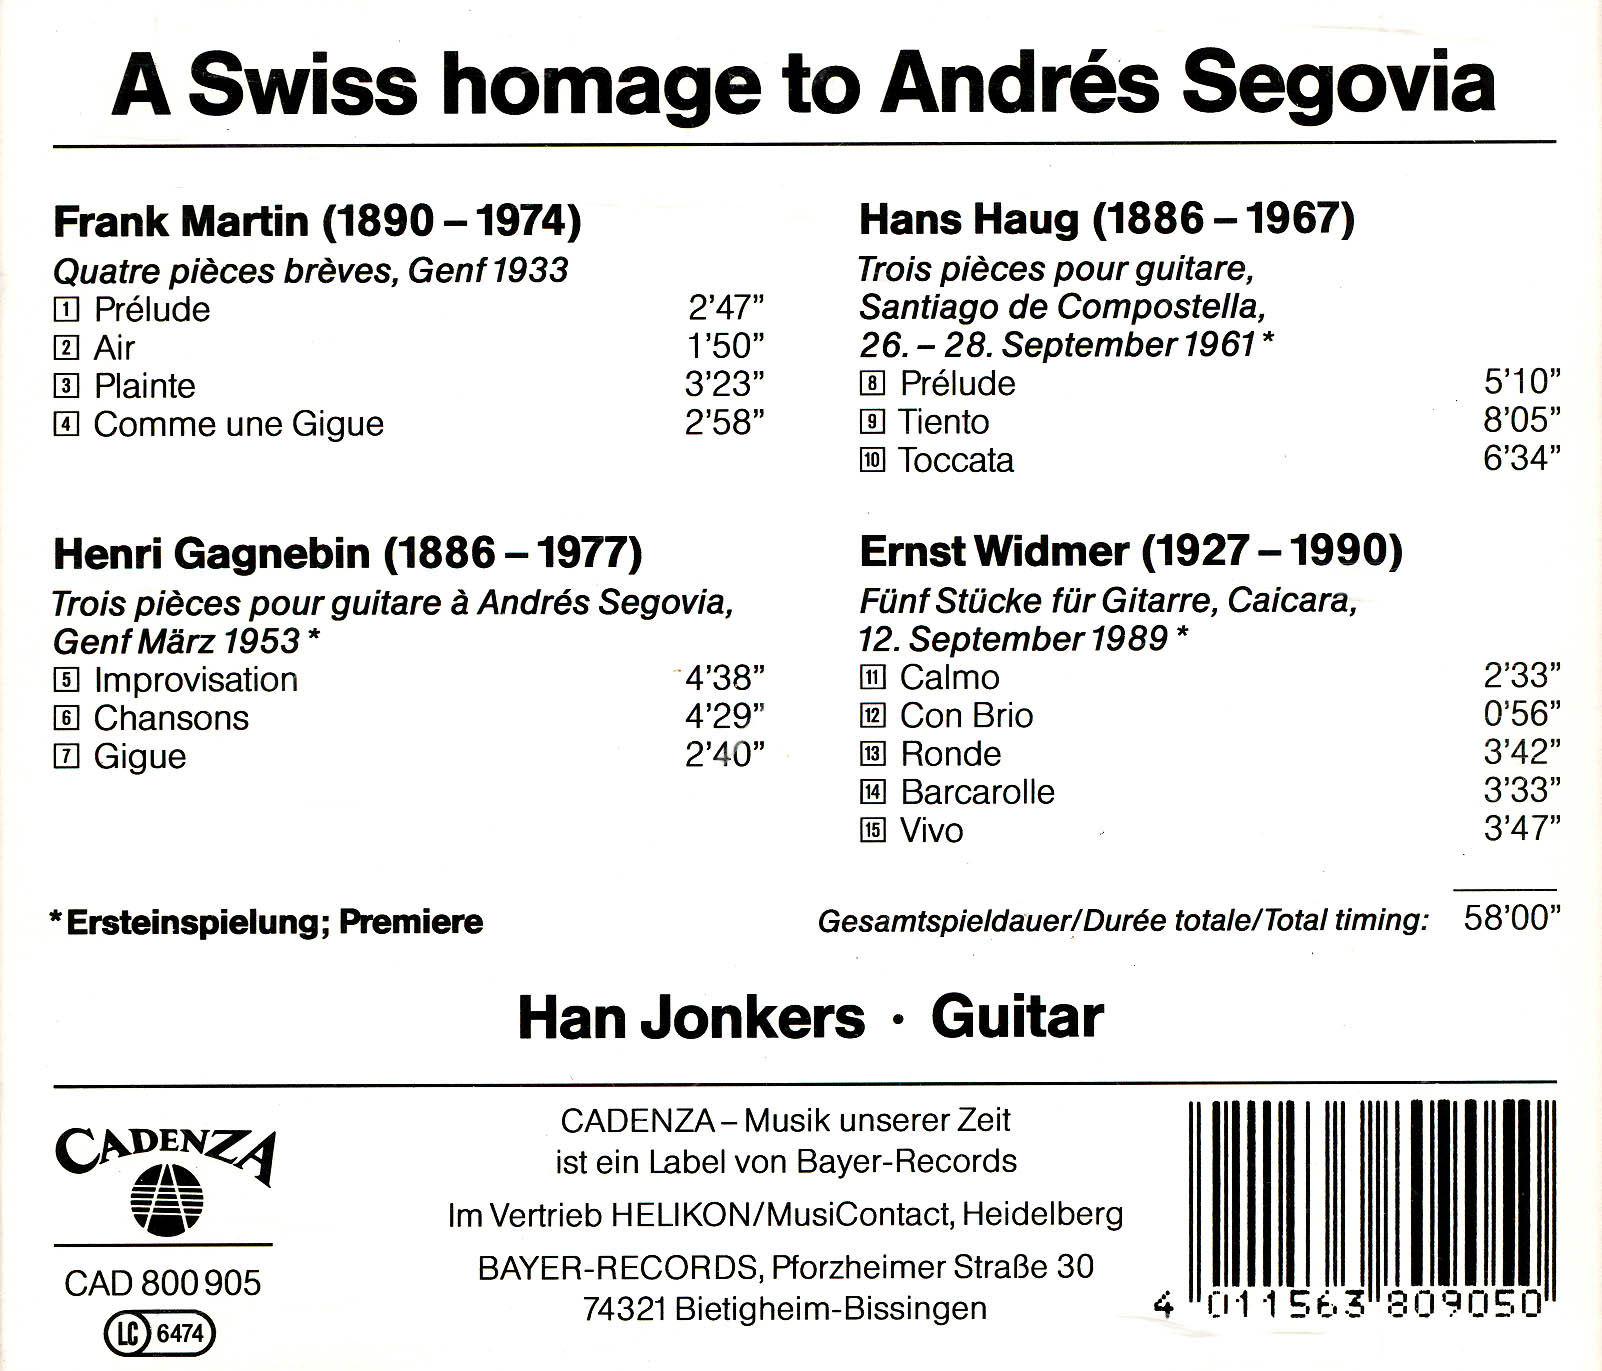 A Swiss Hommage to Andres Segovia